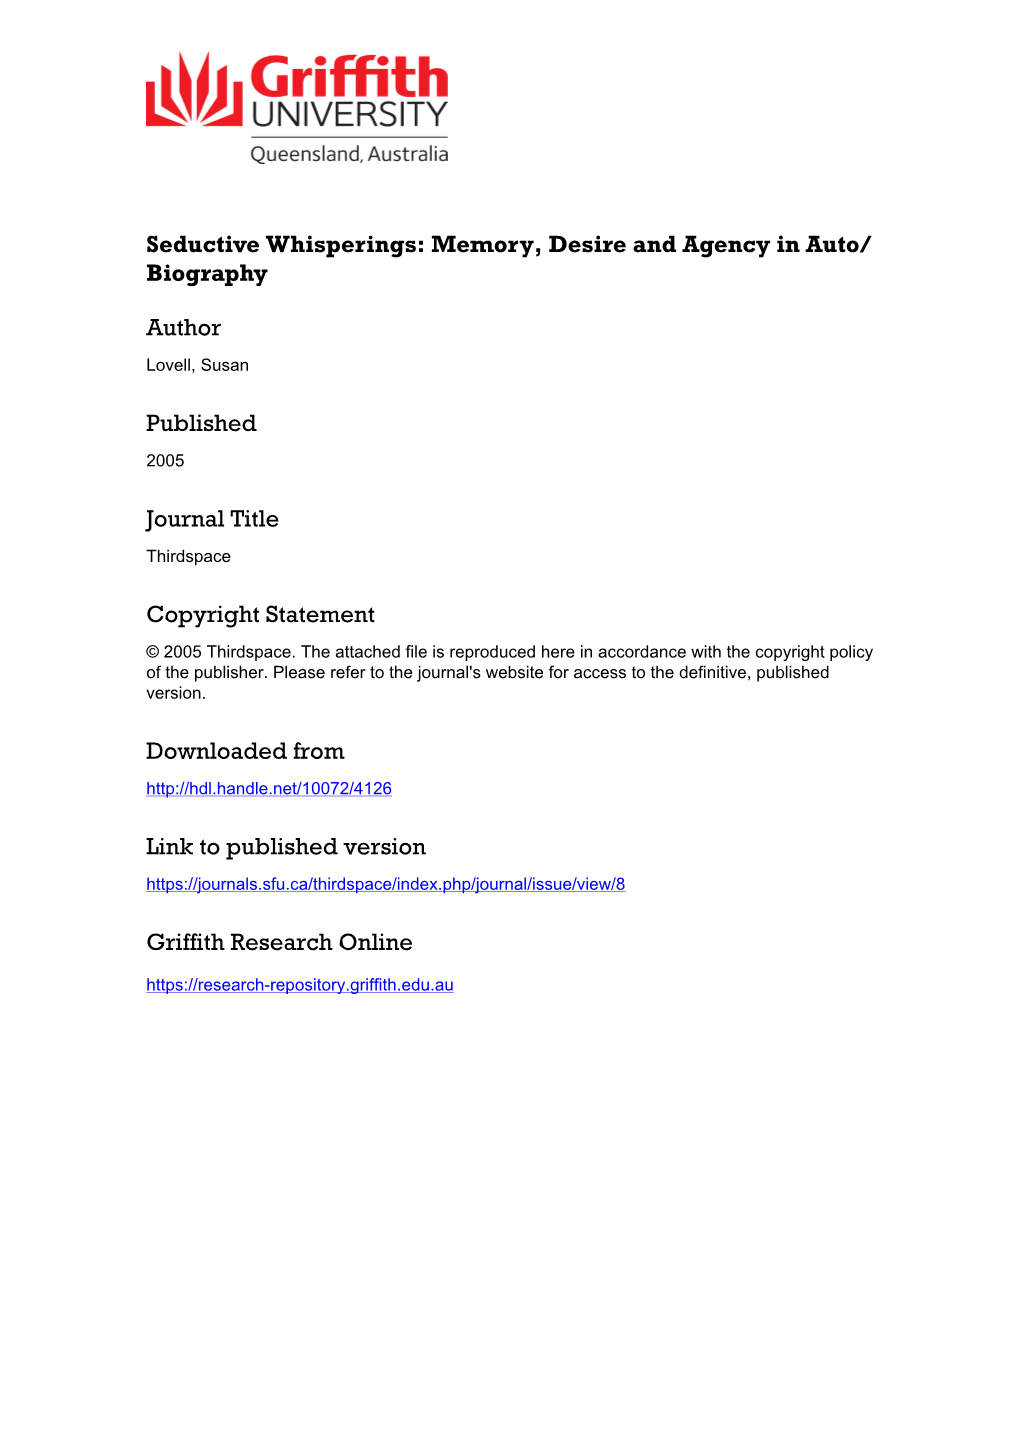 Memory, Desire, and Agency in Auto/Biography